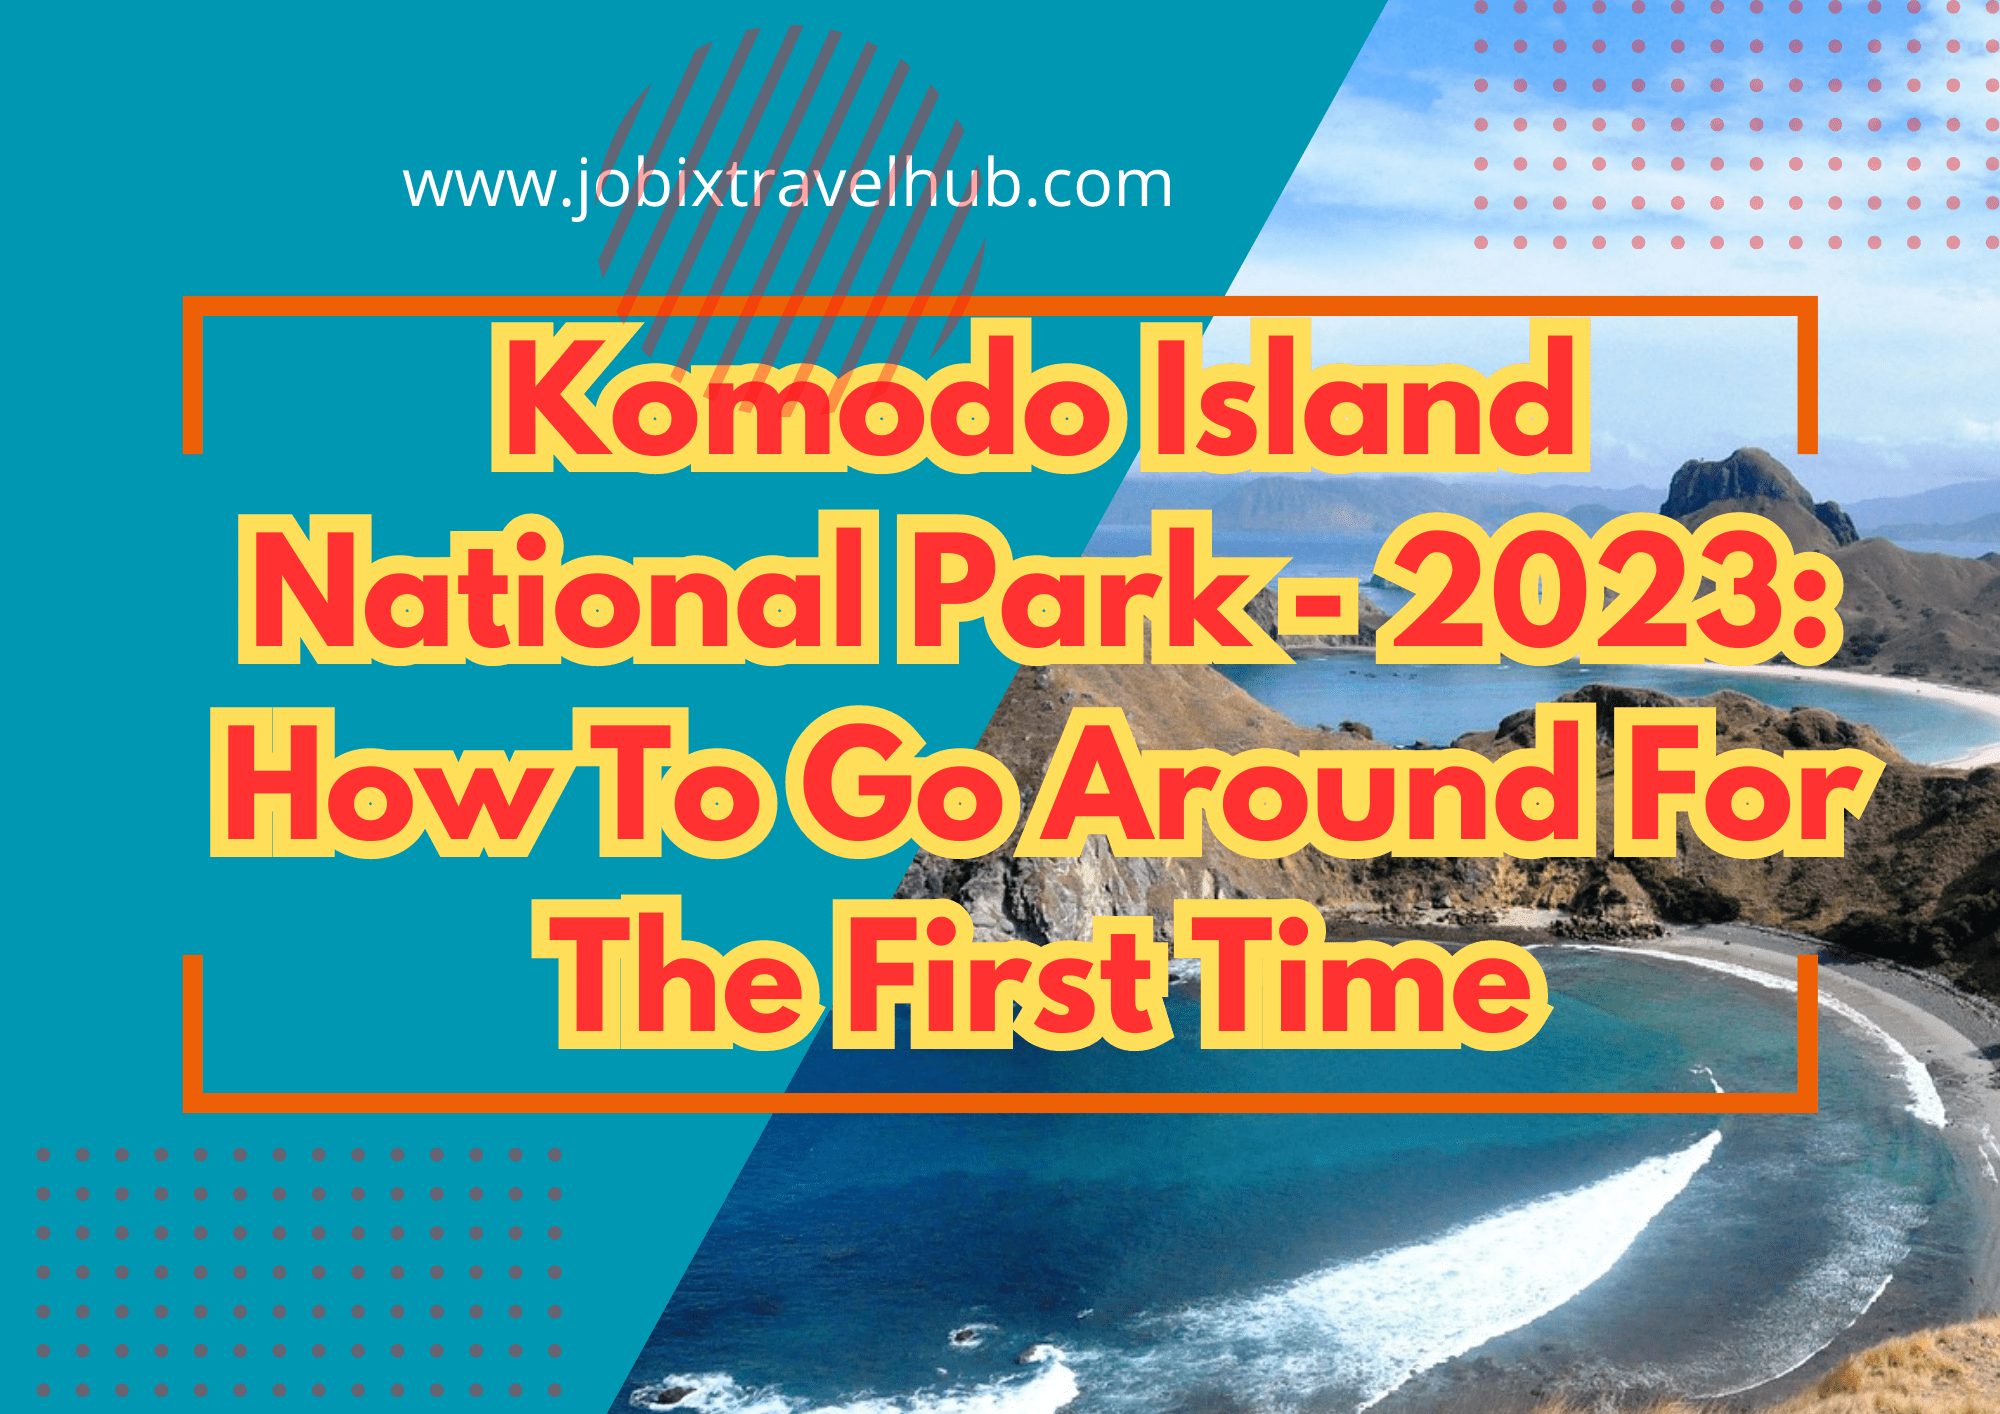 Komodo Island National Park - 2023: How To Go Around For The First Time